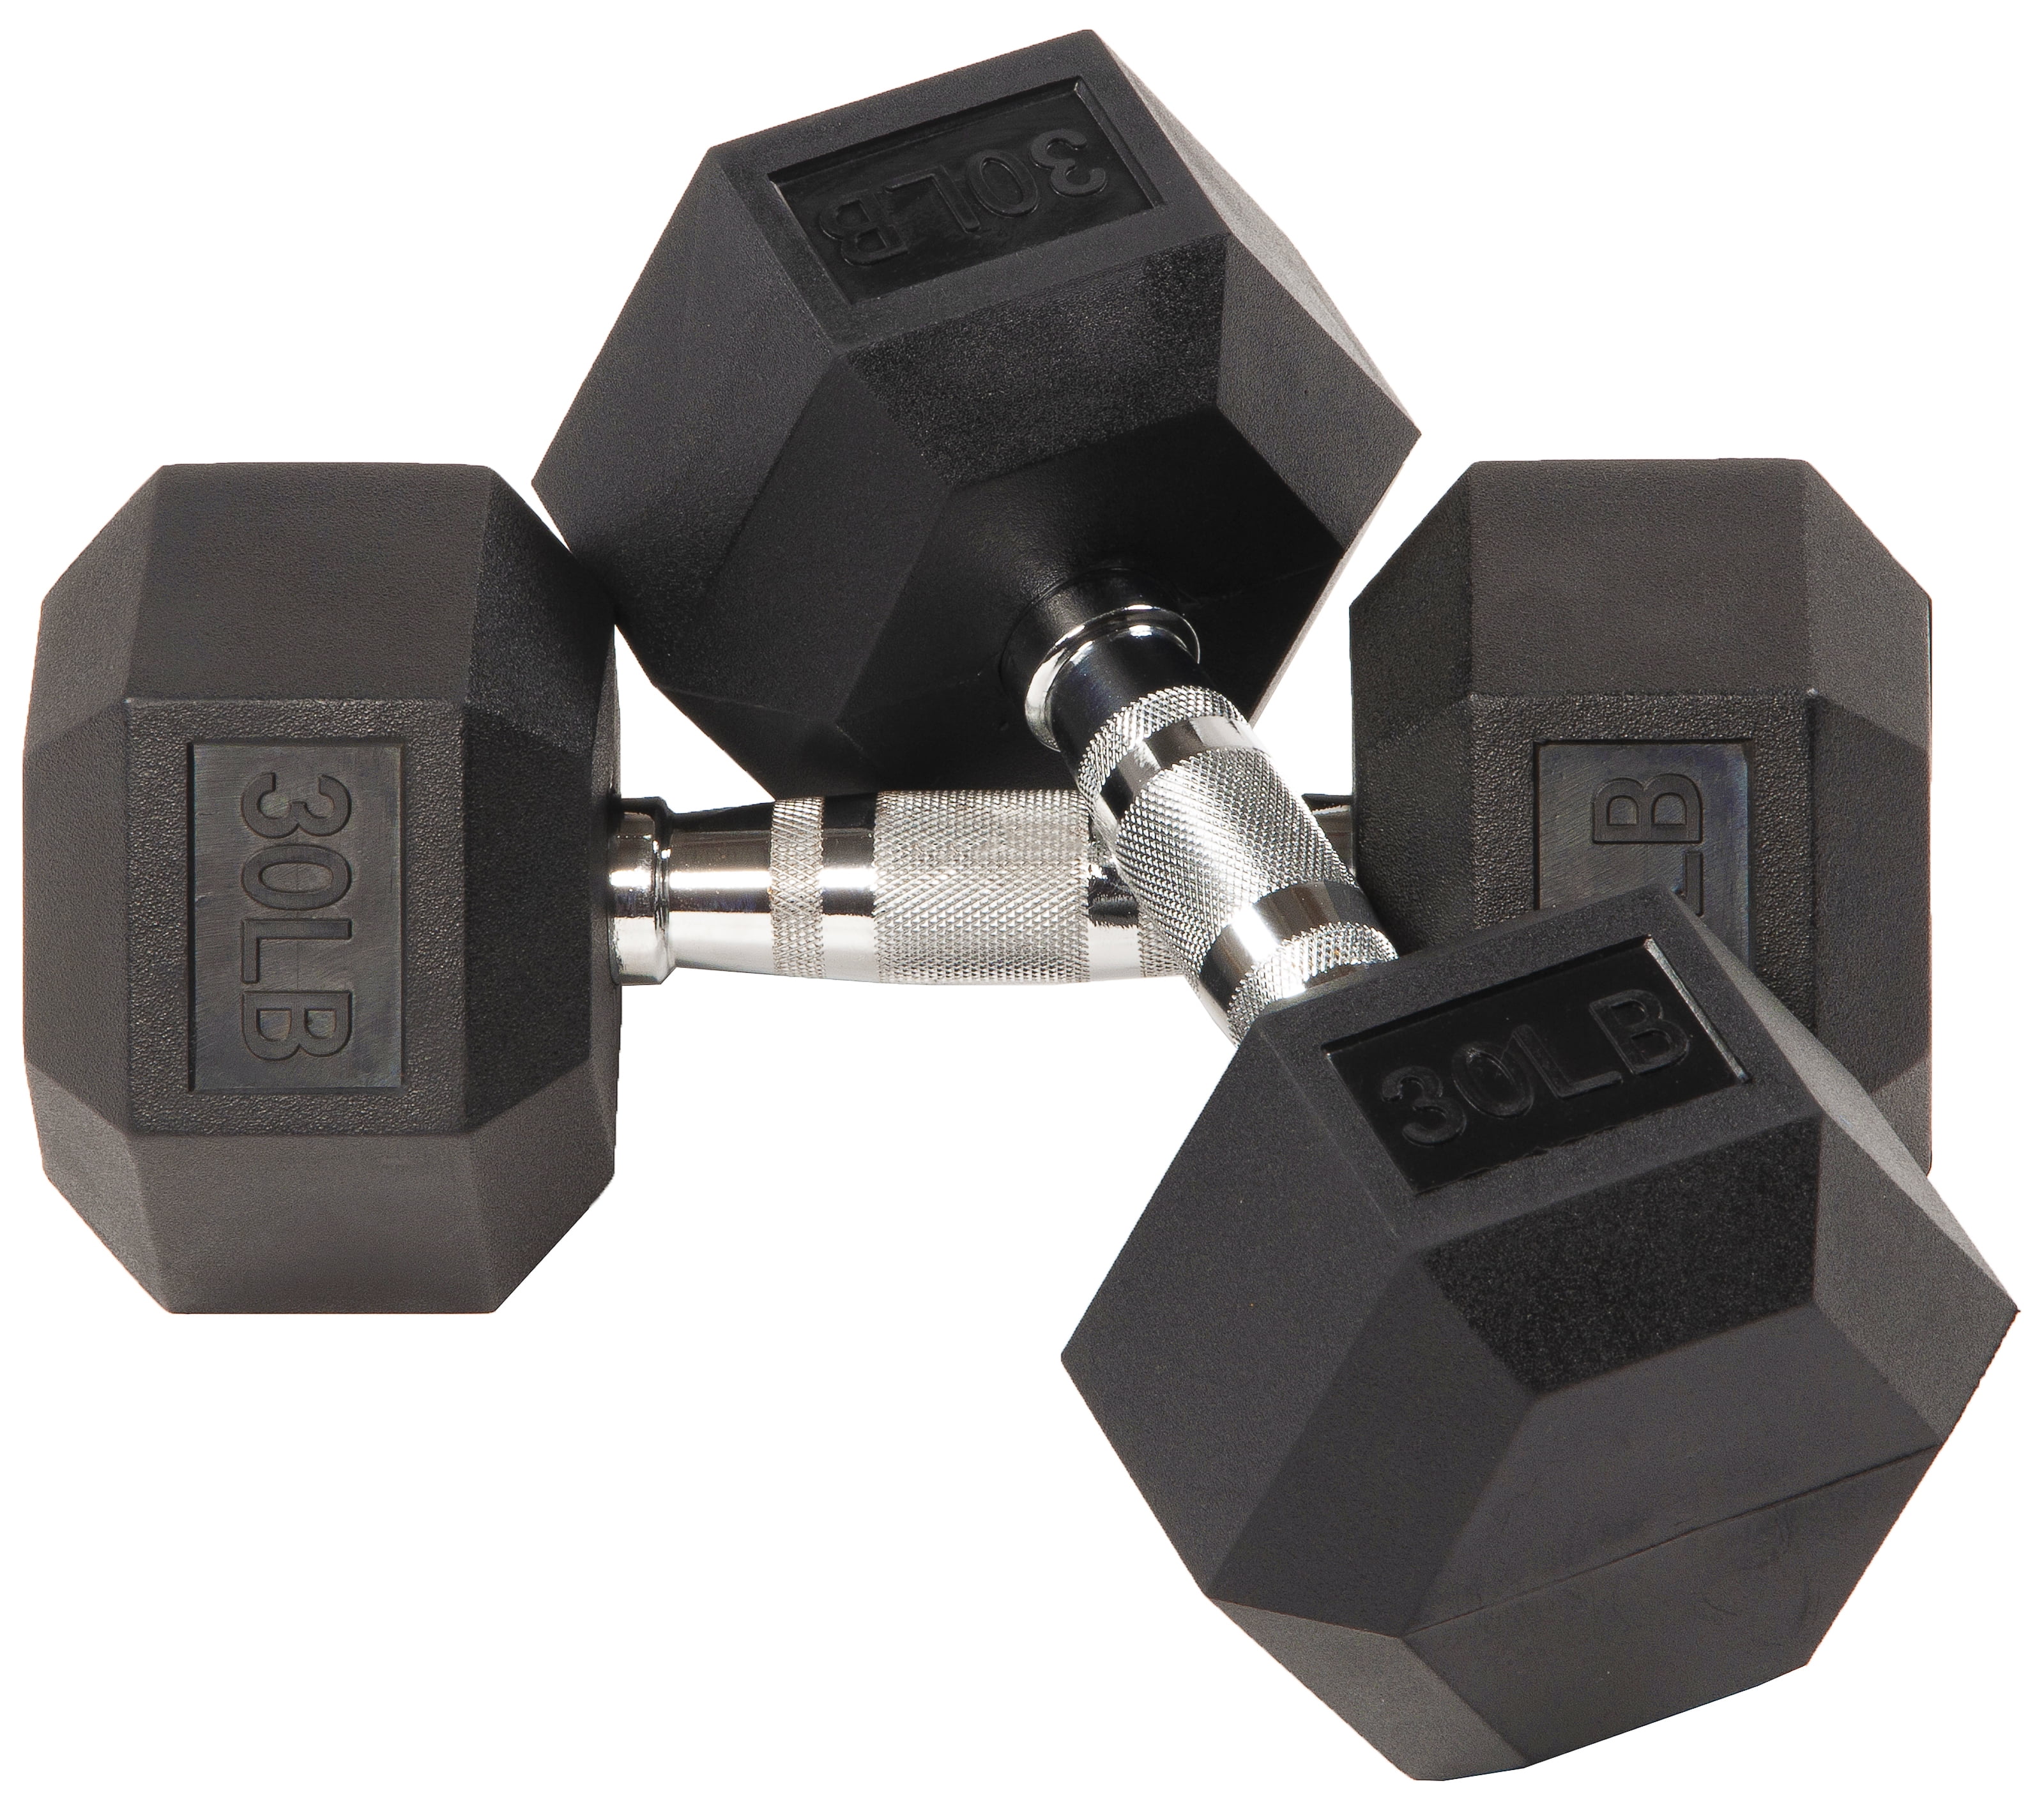 Balancefrom Rubber Encased Hex Dumbbell in Pairs